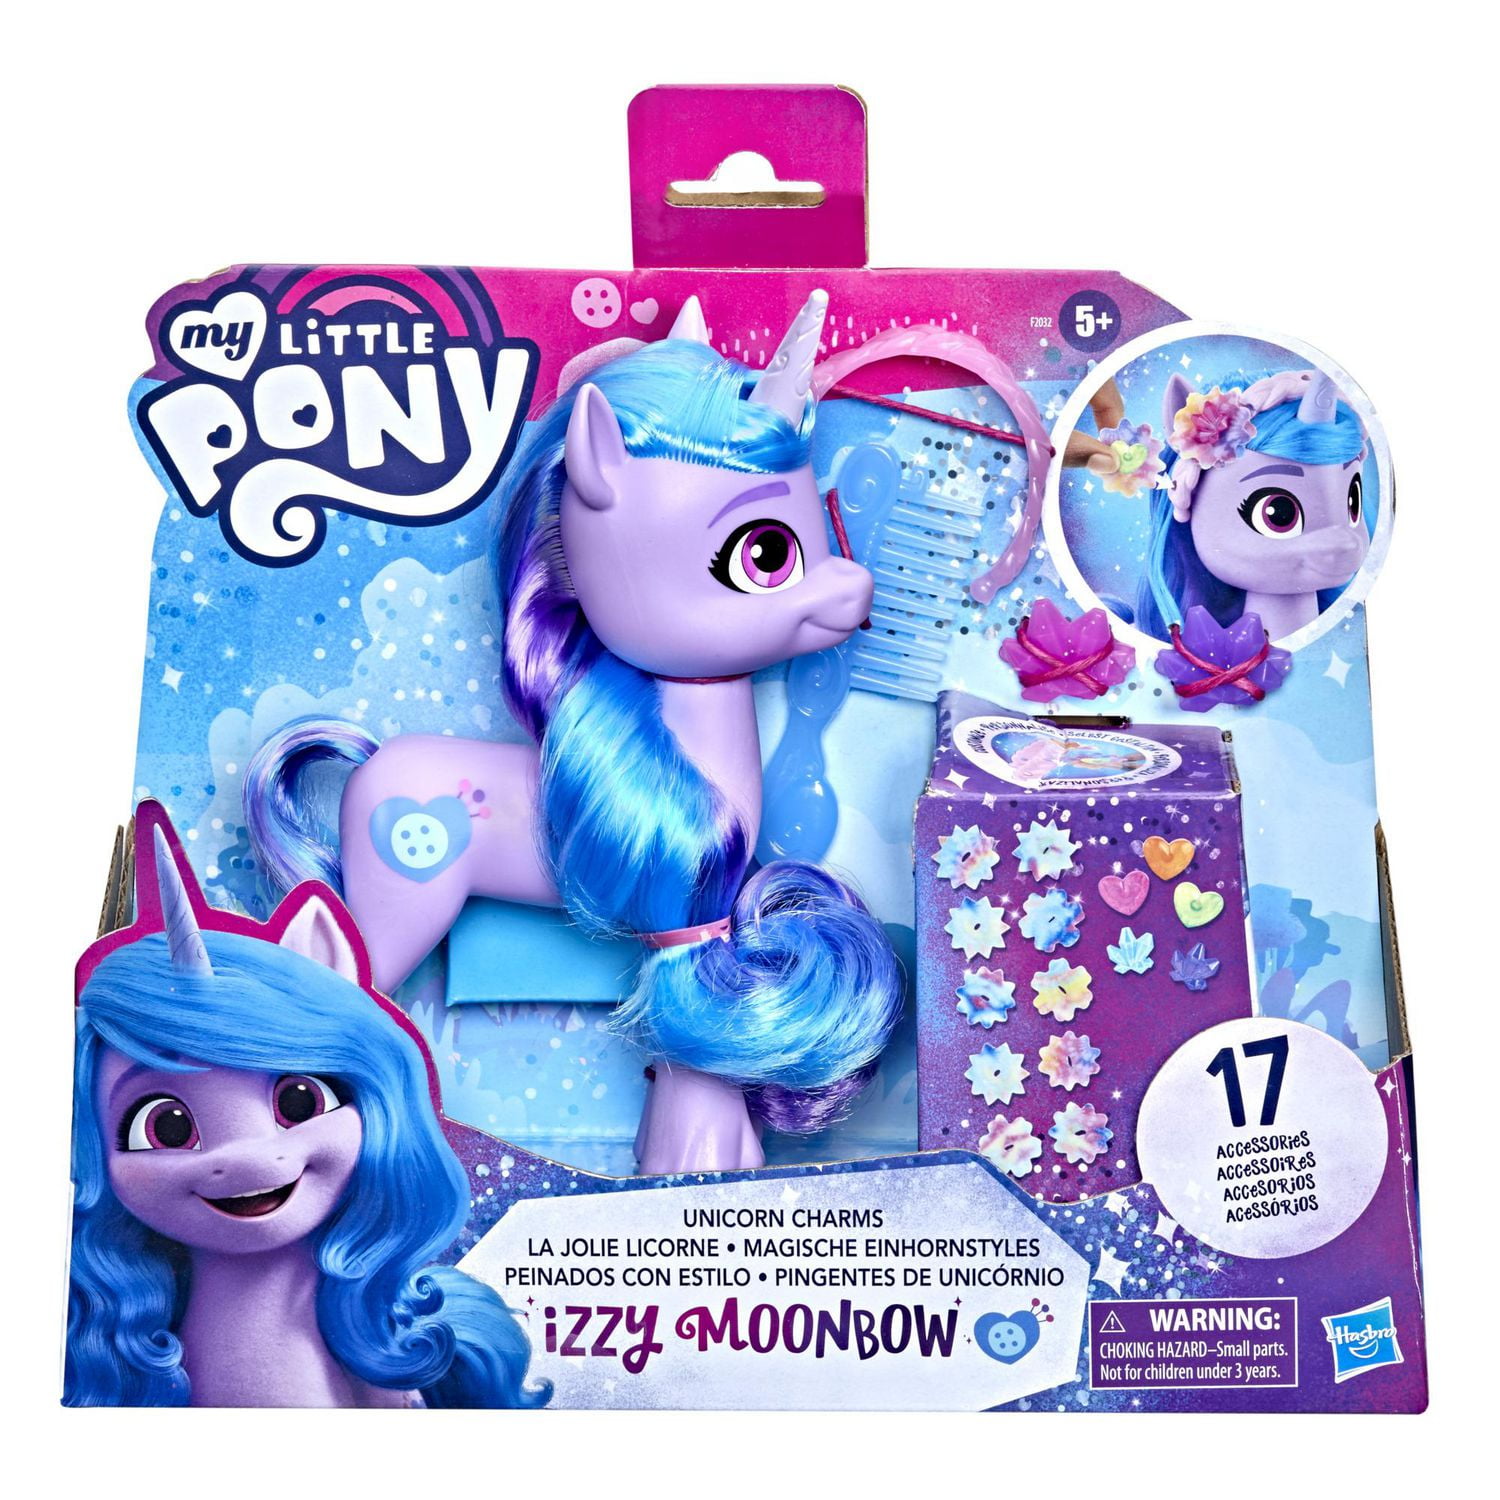 My Little Pony: A New Generation Movie Friends Figure - 3-Inch Pony Toy for  Kids Ages 3 and Up - My Little Pony